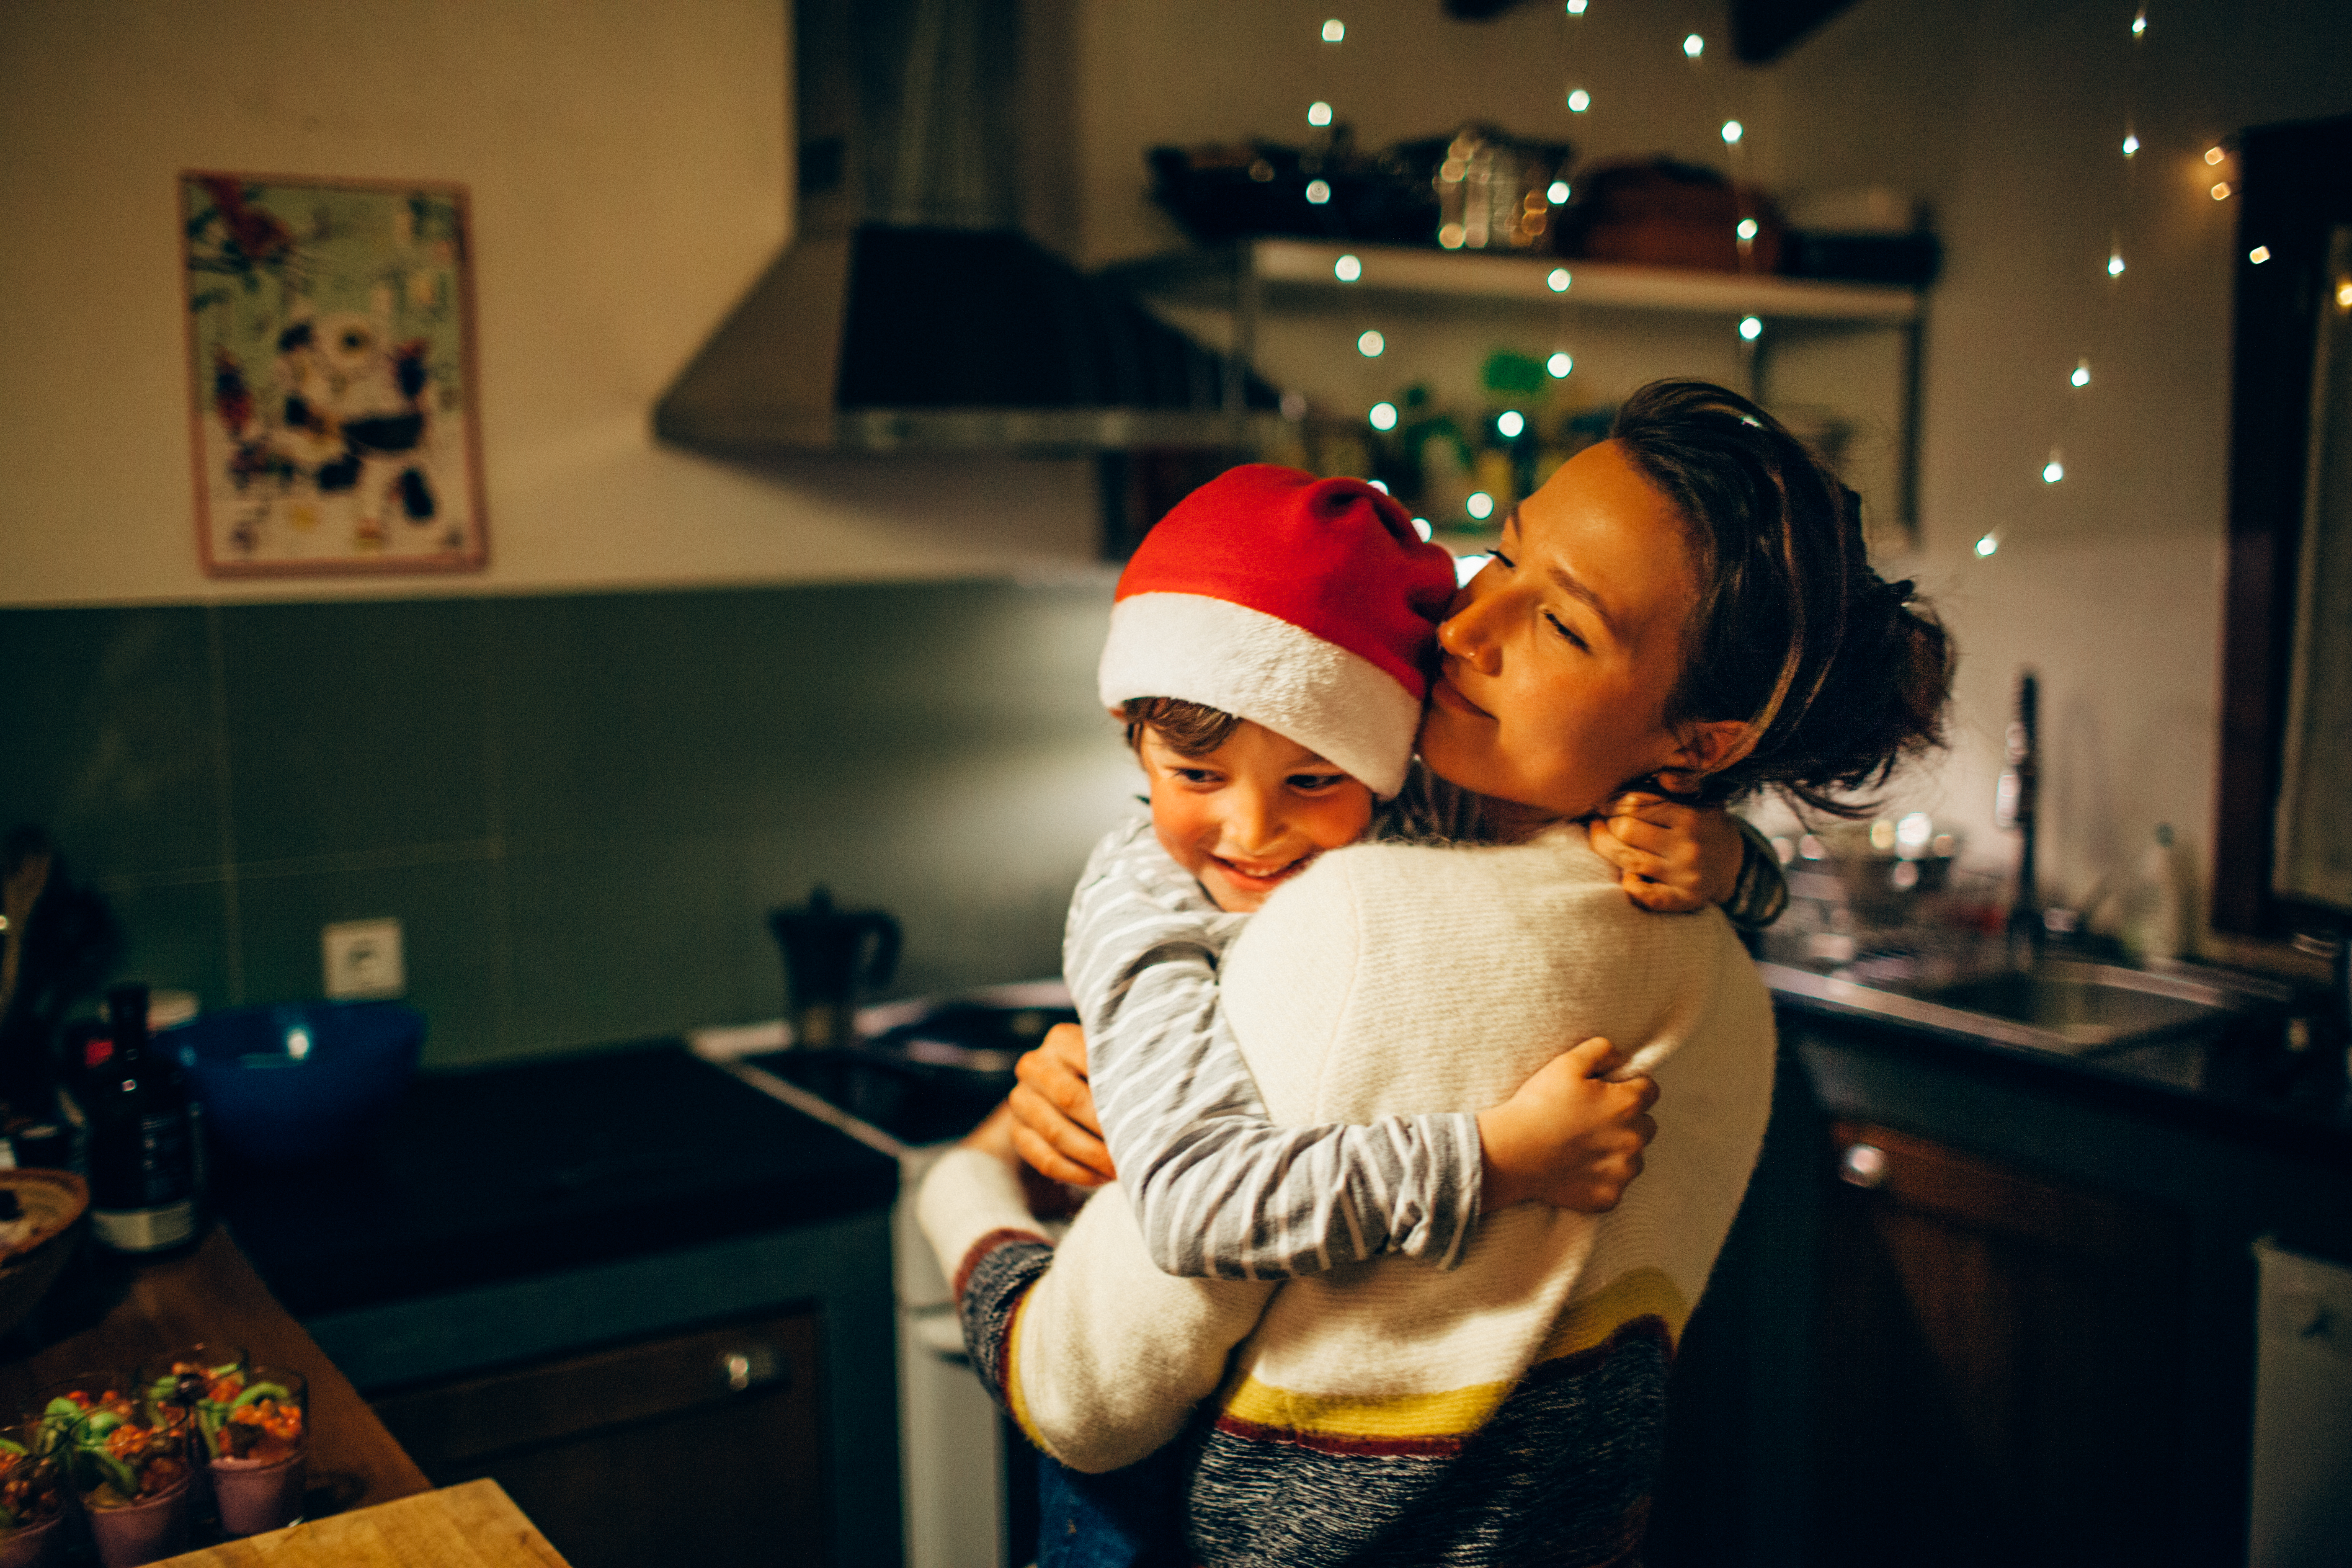 Mother and son hugging in the kitchen at Christmas | Source: Getty Images